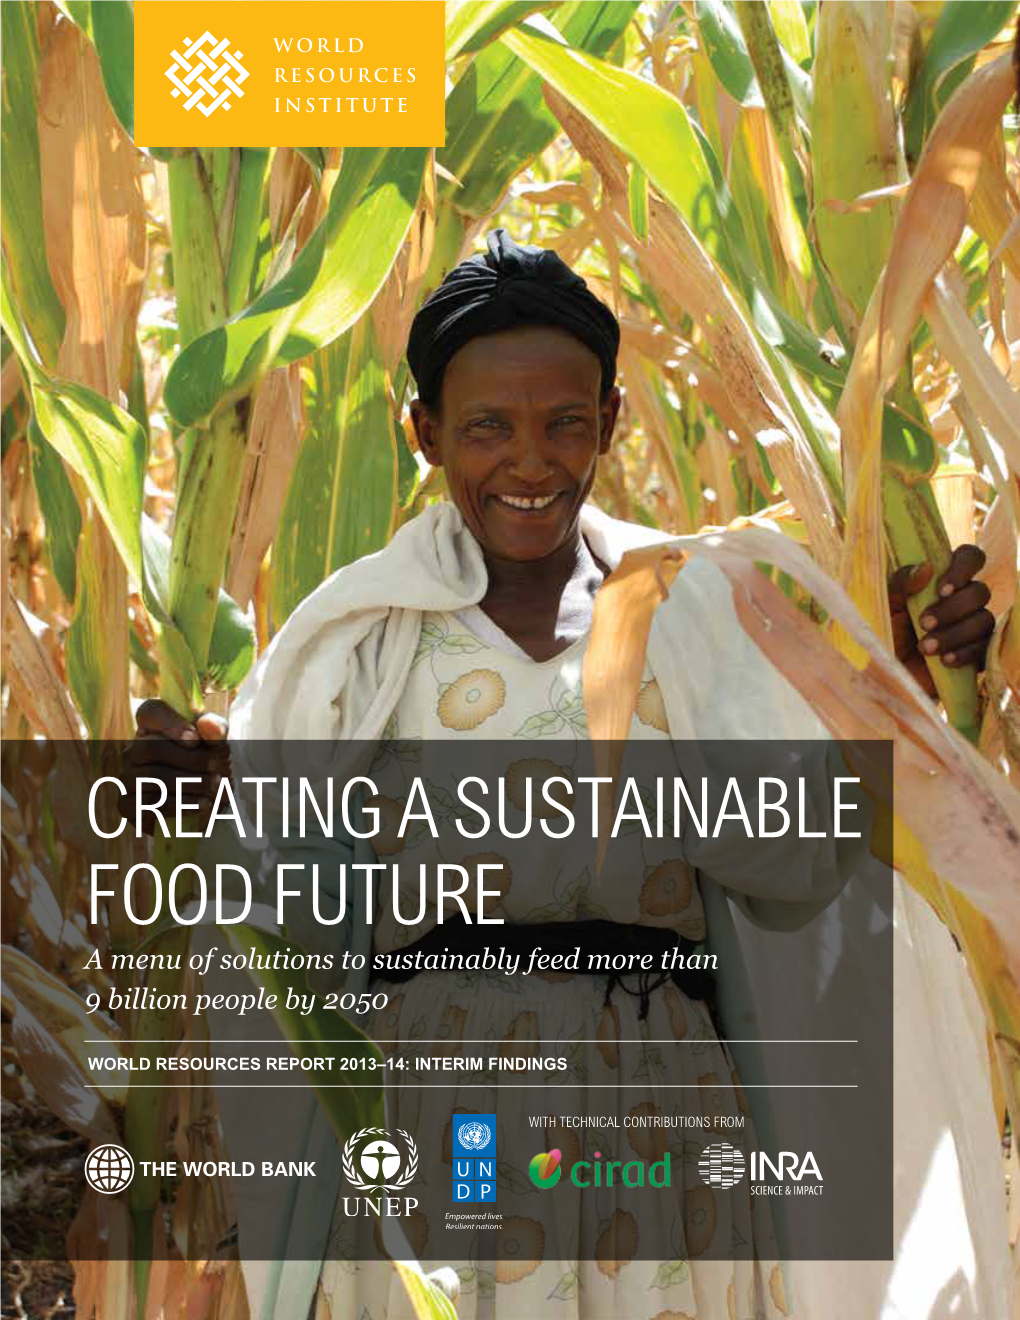 Creating a Sustainable Food Future a Menu of Solutions to Sustainably Feed More Than 9 Billion People by 2050